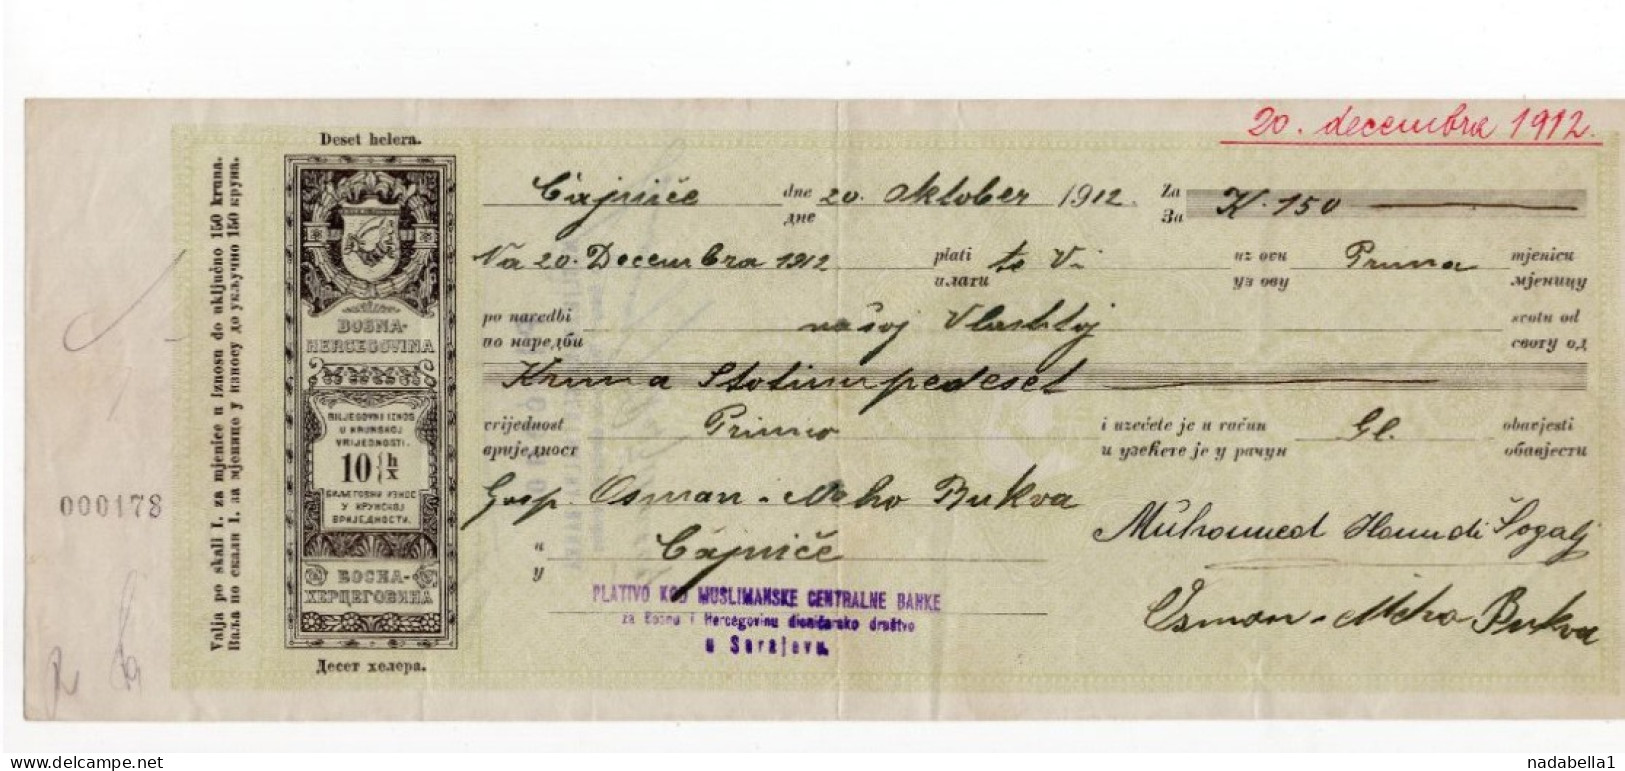 1912. BOSNIA,AUSTRIAN OCCUPATION,SARAJEVO,MUSLIM CENTRAL BANK,10 HELLER CHEQUE - Cheques En Traveller's Cheques